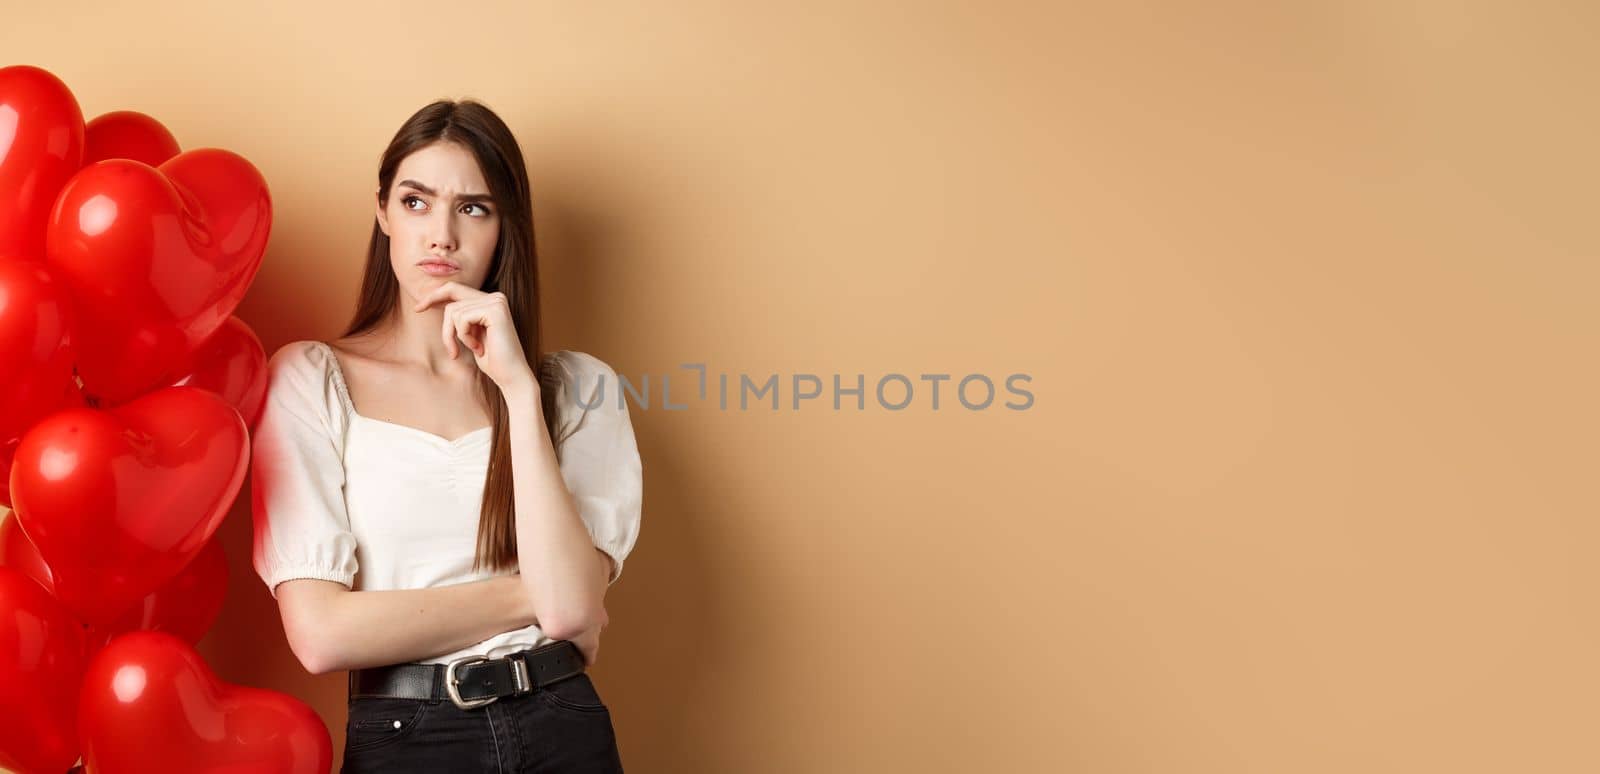 Valentines day and love concept. Thoughtful young woman standing near hearts balloons and looking aside with doubtful face, having assumptions, beige background.